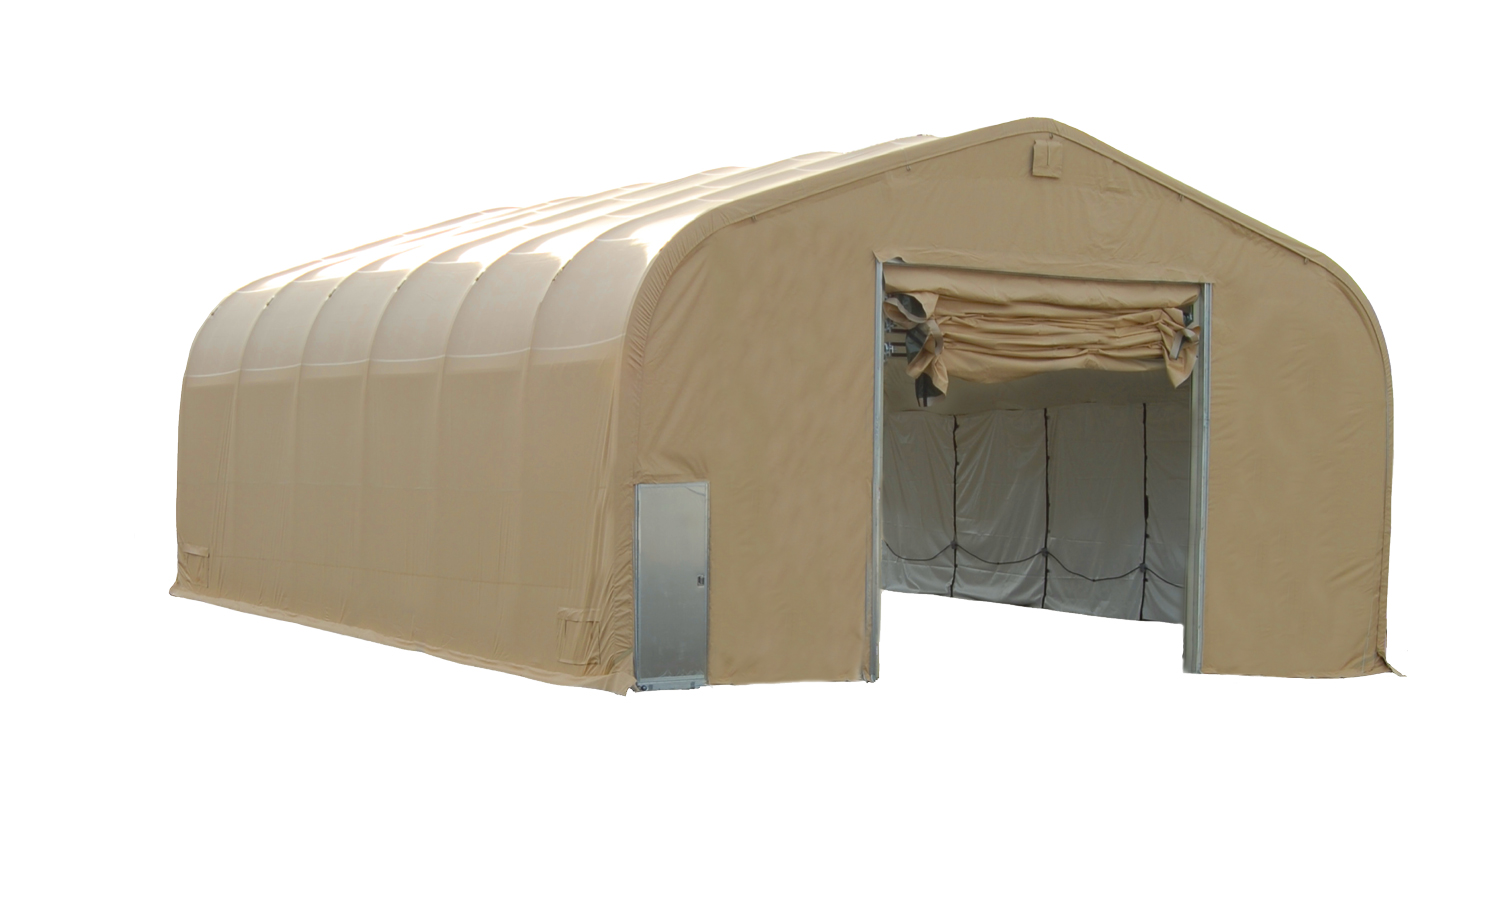 CAMSS 40EX50SP MILITARY SHELTER - TAN